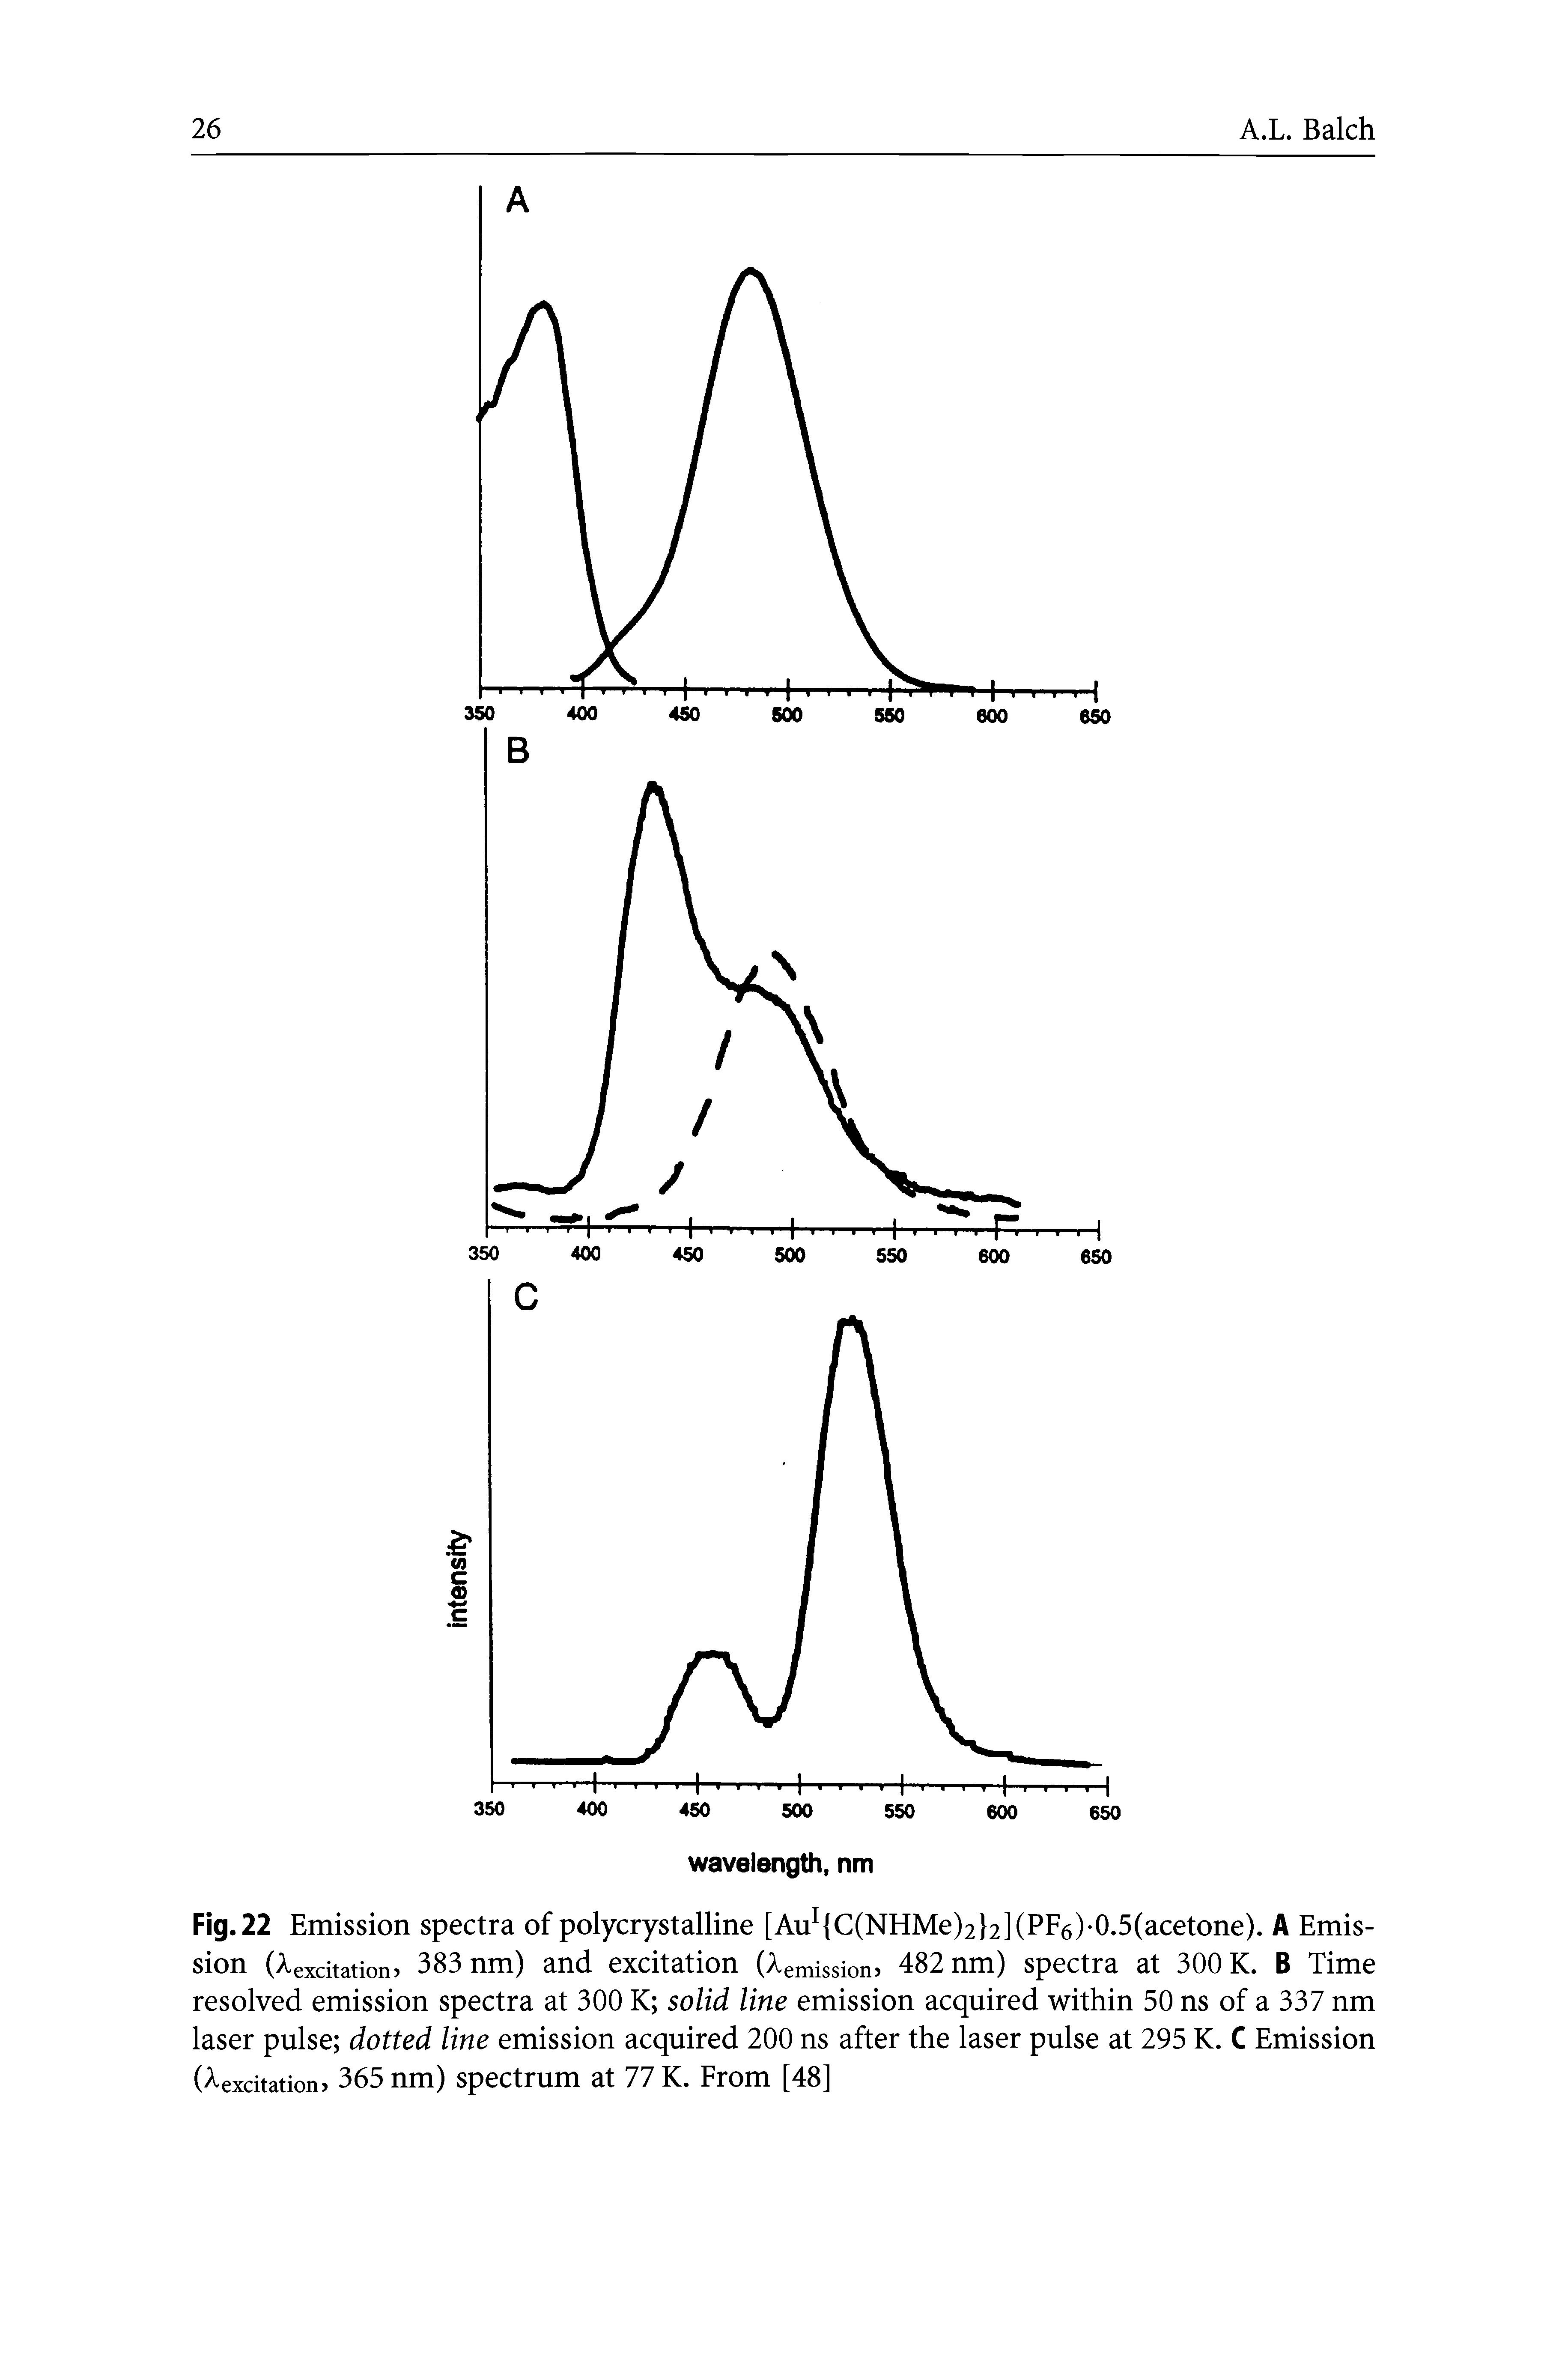 Fig. 22 Emission spectra of polycrystalline [AuI C(NHMe)2 2](PF6)-0.5(acetone). A Emission (A,excitation 383 nm) and excitation (Aemission 482 nm) spectra at 300 K. B Time resolved emission spectra at 300 K solid line emission acquired within 50 ns of a 337 nm laser pulse dotted line emission acquired 200 ns after the laser pulse at 295 K. C Emission (Aexcitation 365 nm) spectrum at 77 K. From [48]...